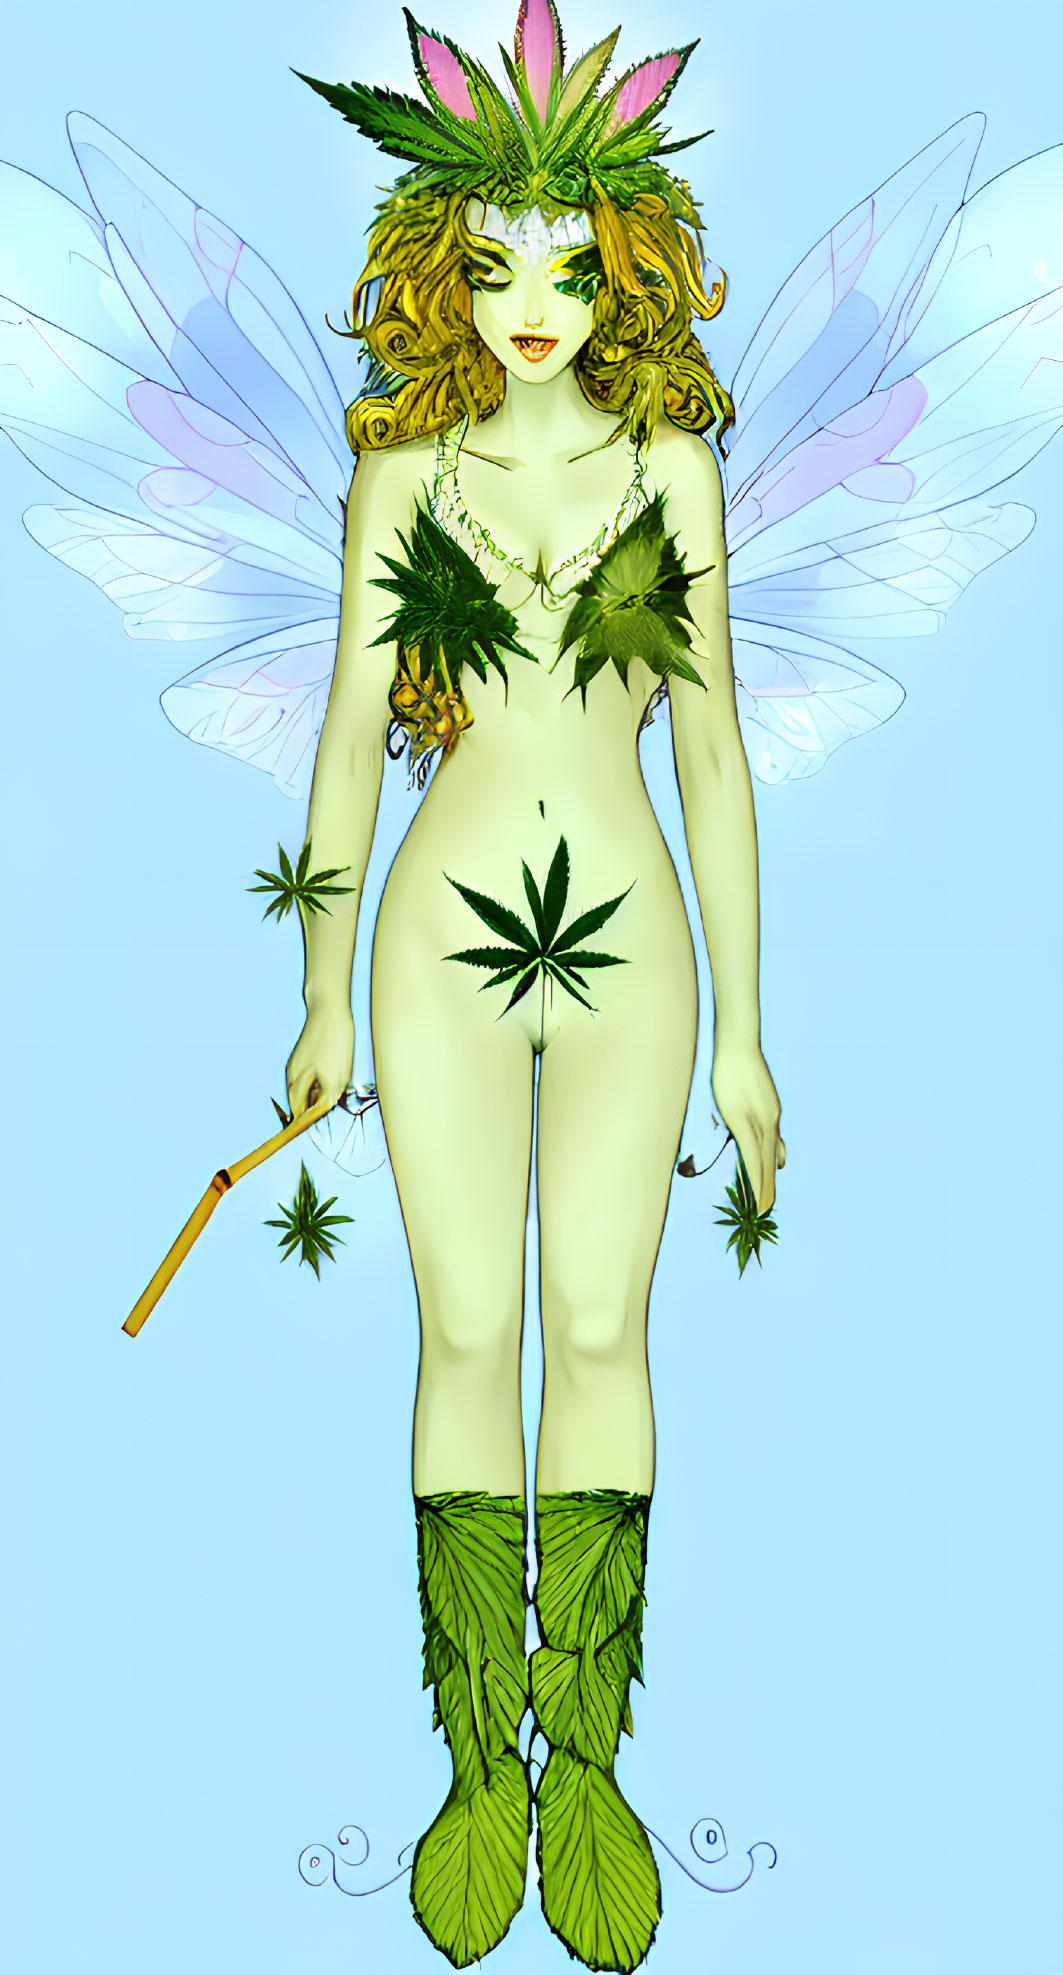 Fantasy illustration of female figure with cannabis-themed adornments and wings